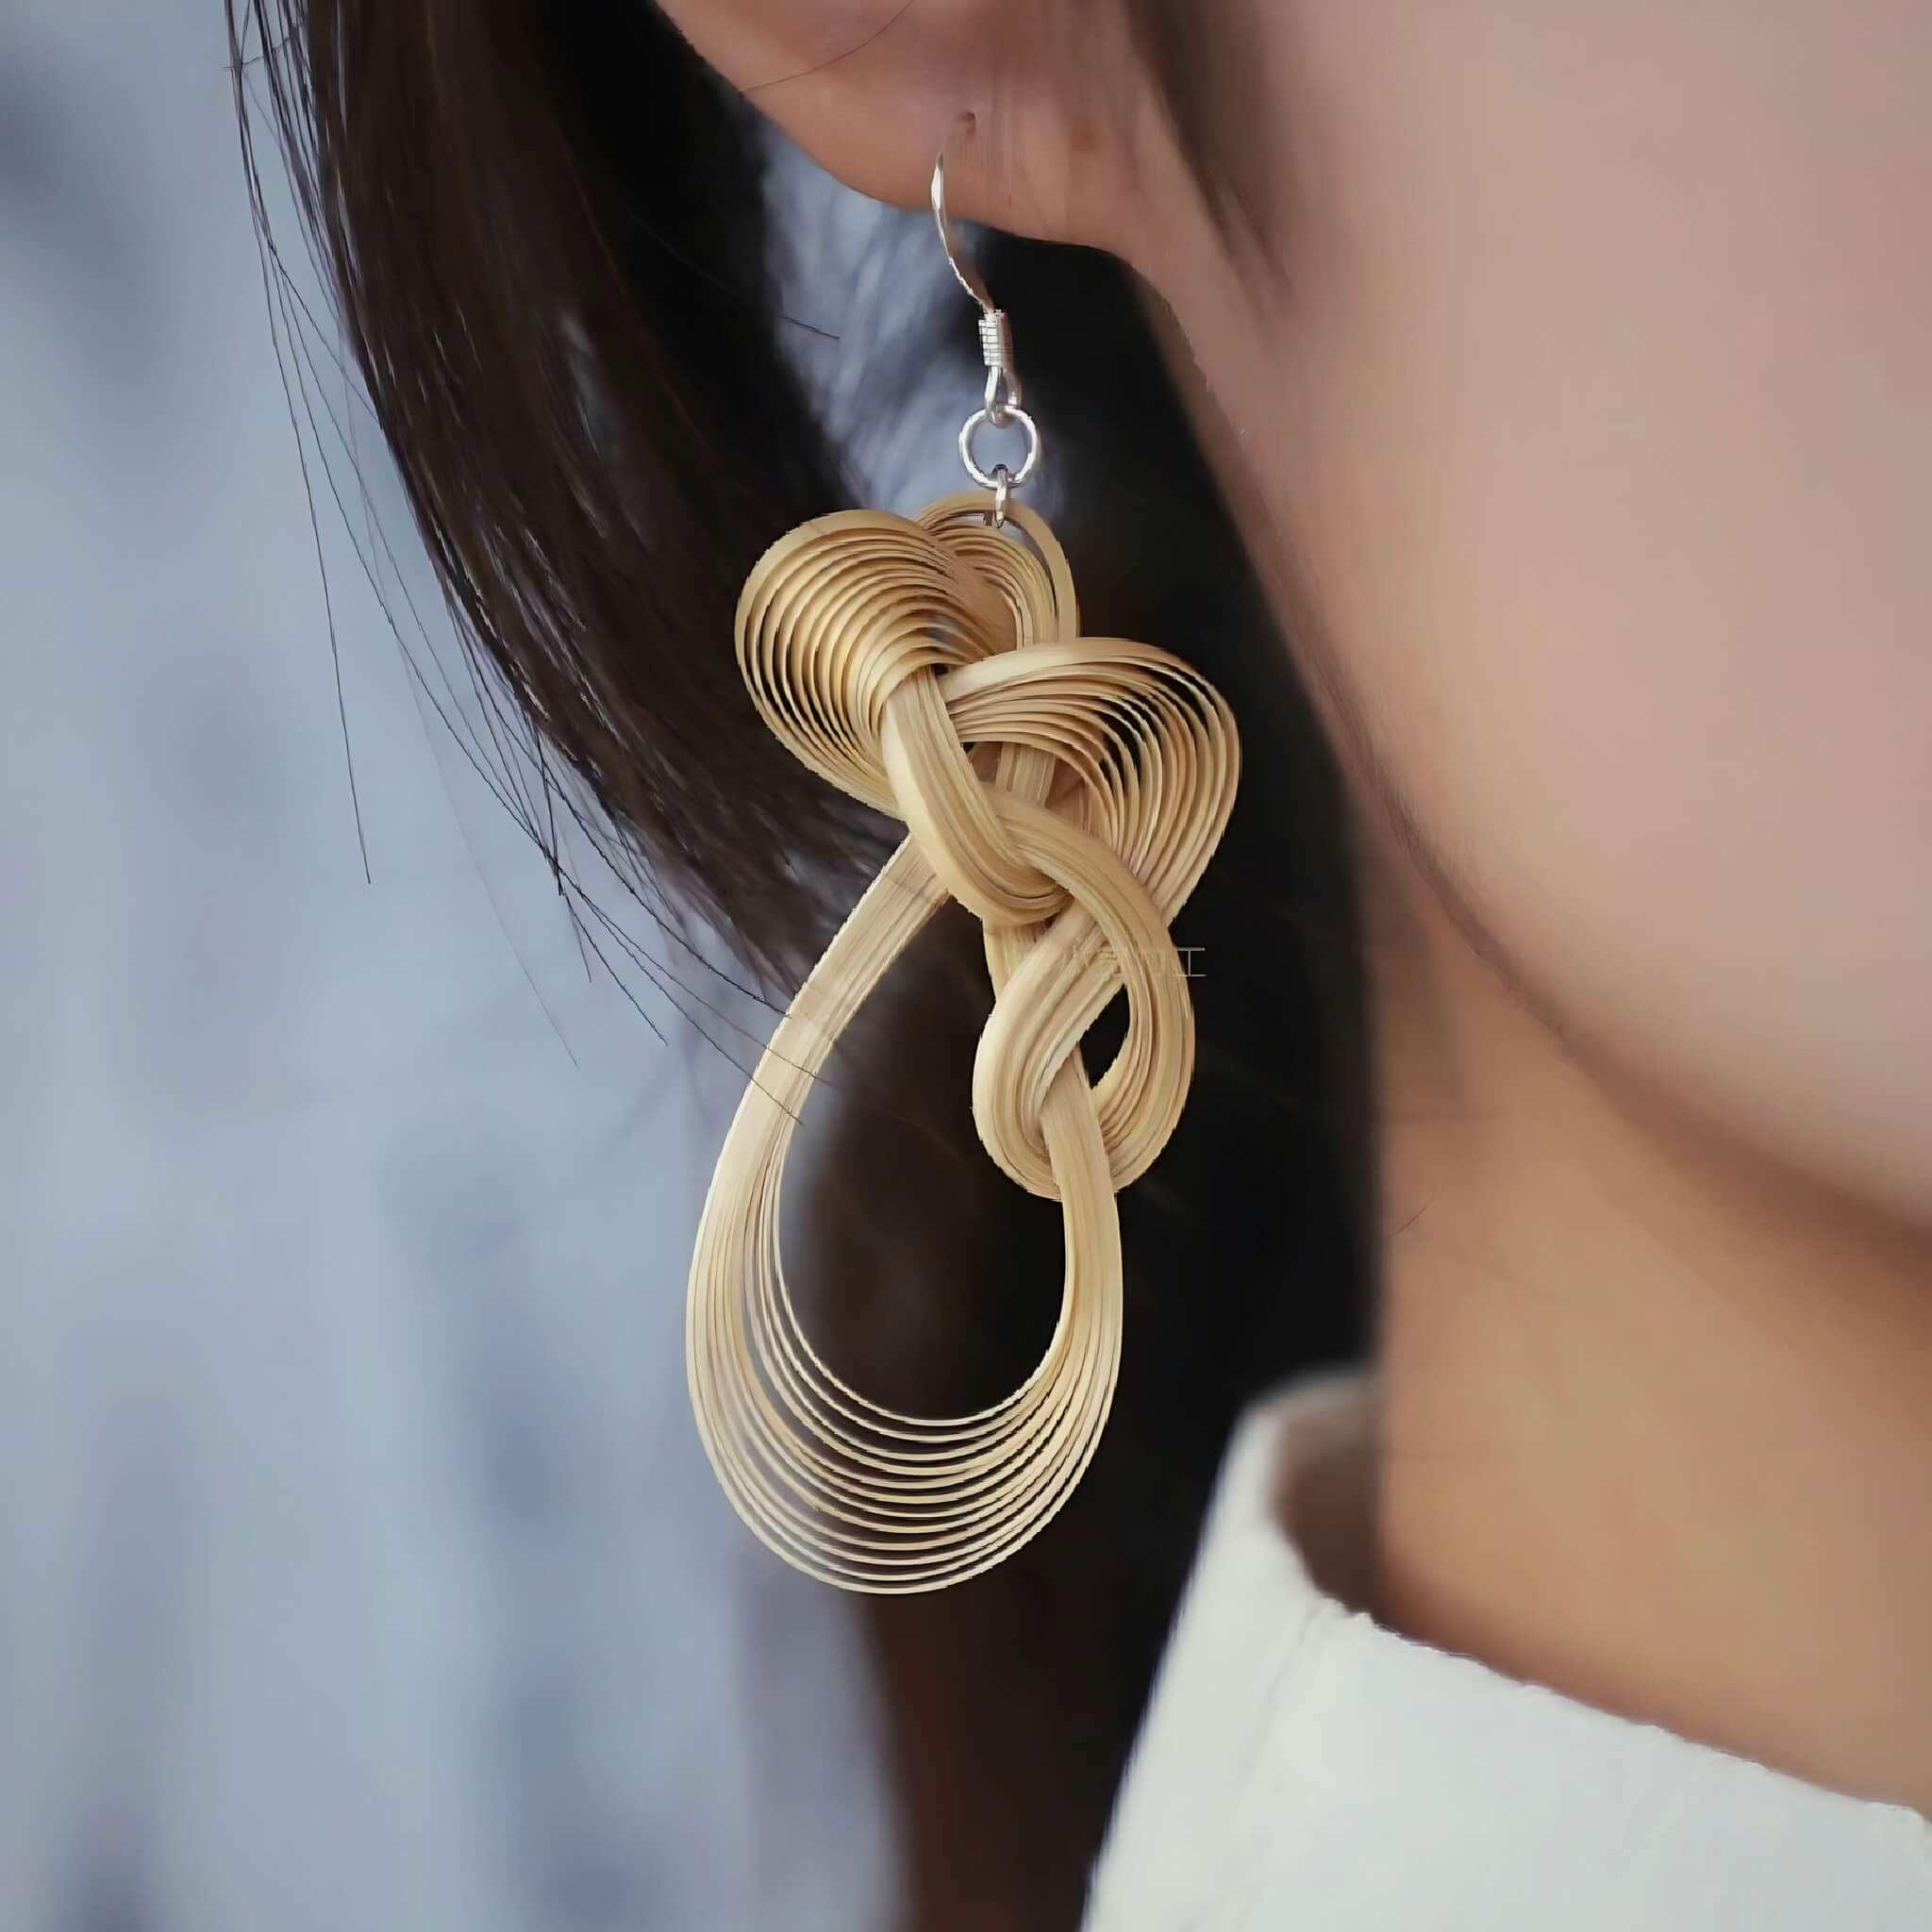 Bamboo-woven Earrings | Chinese Knot